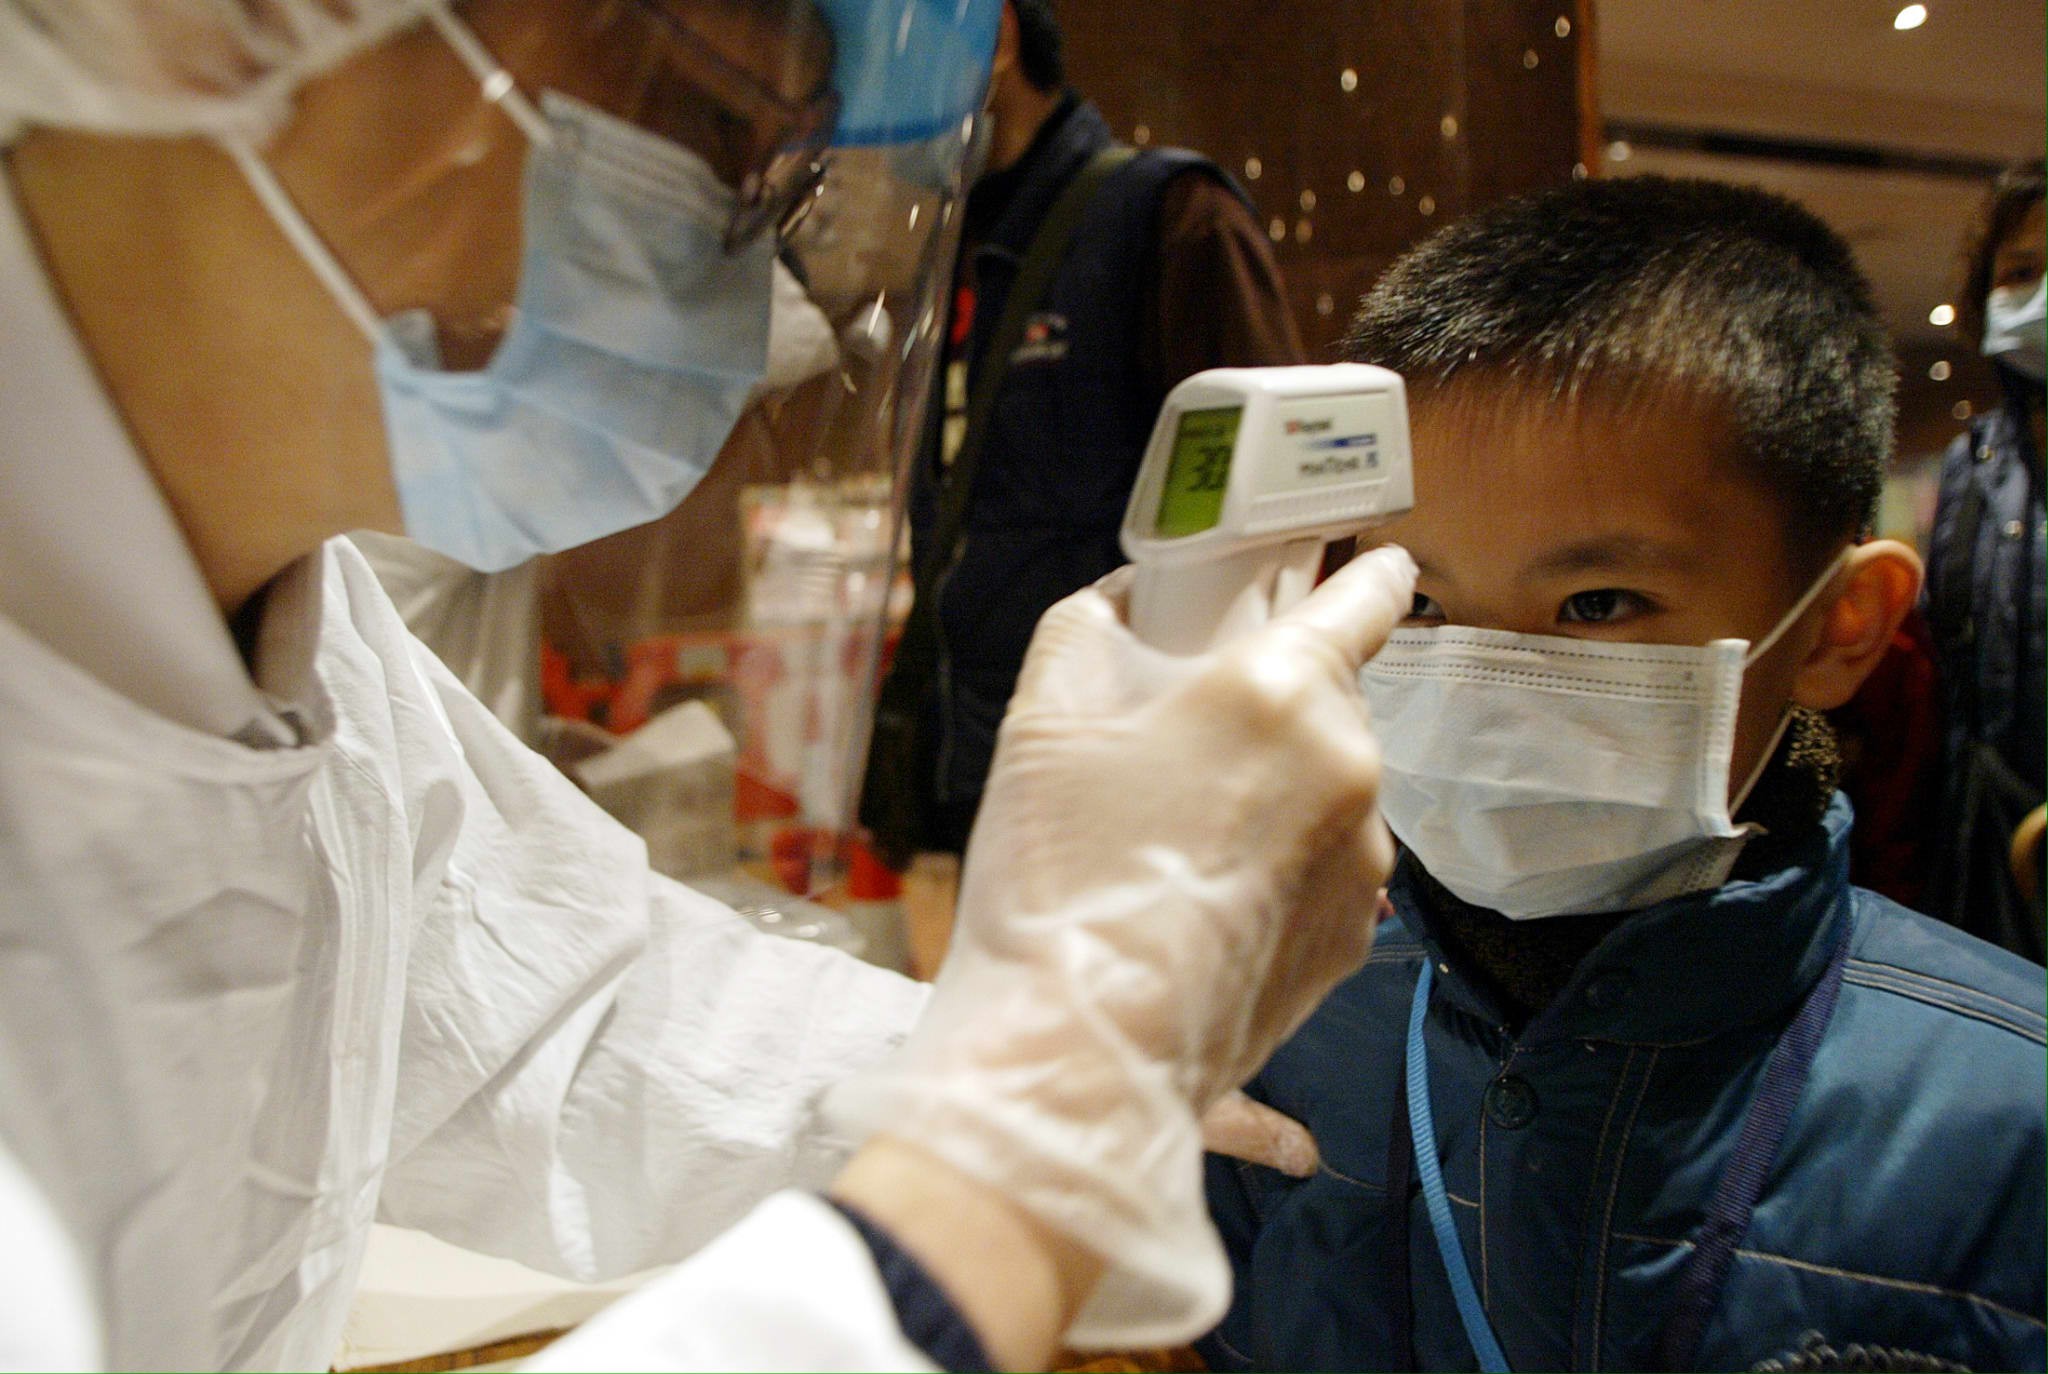 A boy has his temperature taken as he arrives at the Queen Elizabeth Hospital on January 20, 2004, where a man was in isolation after showing Sars-like symptoms. Hong Kong had been declared Sars-free the previous year, after 299 died of the disease. Photo: AFP